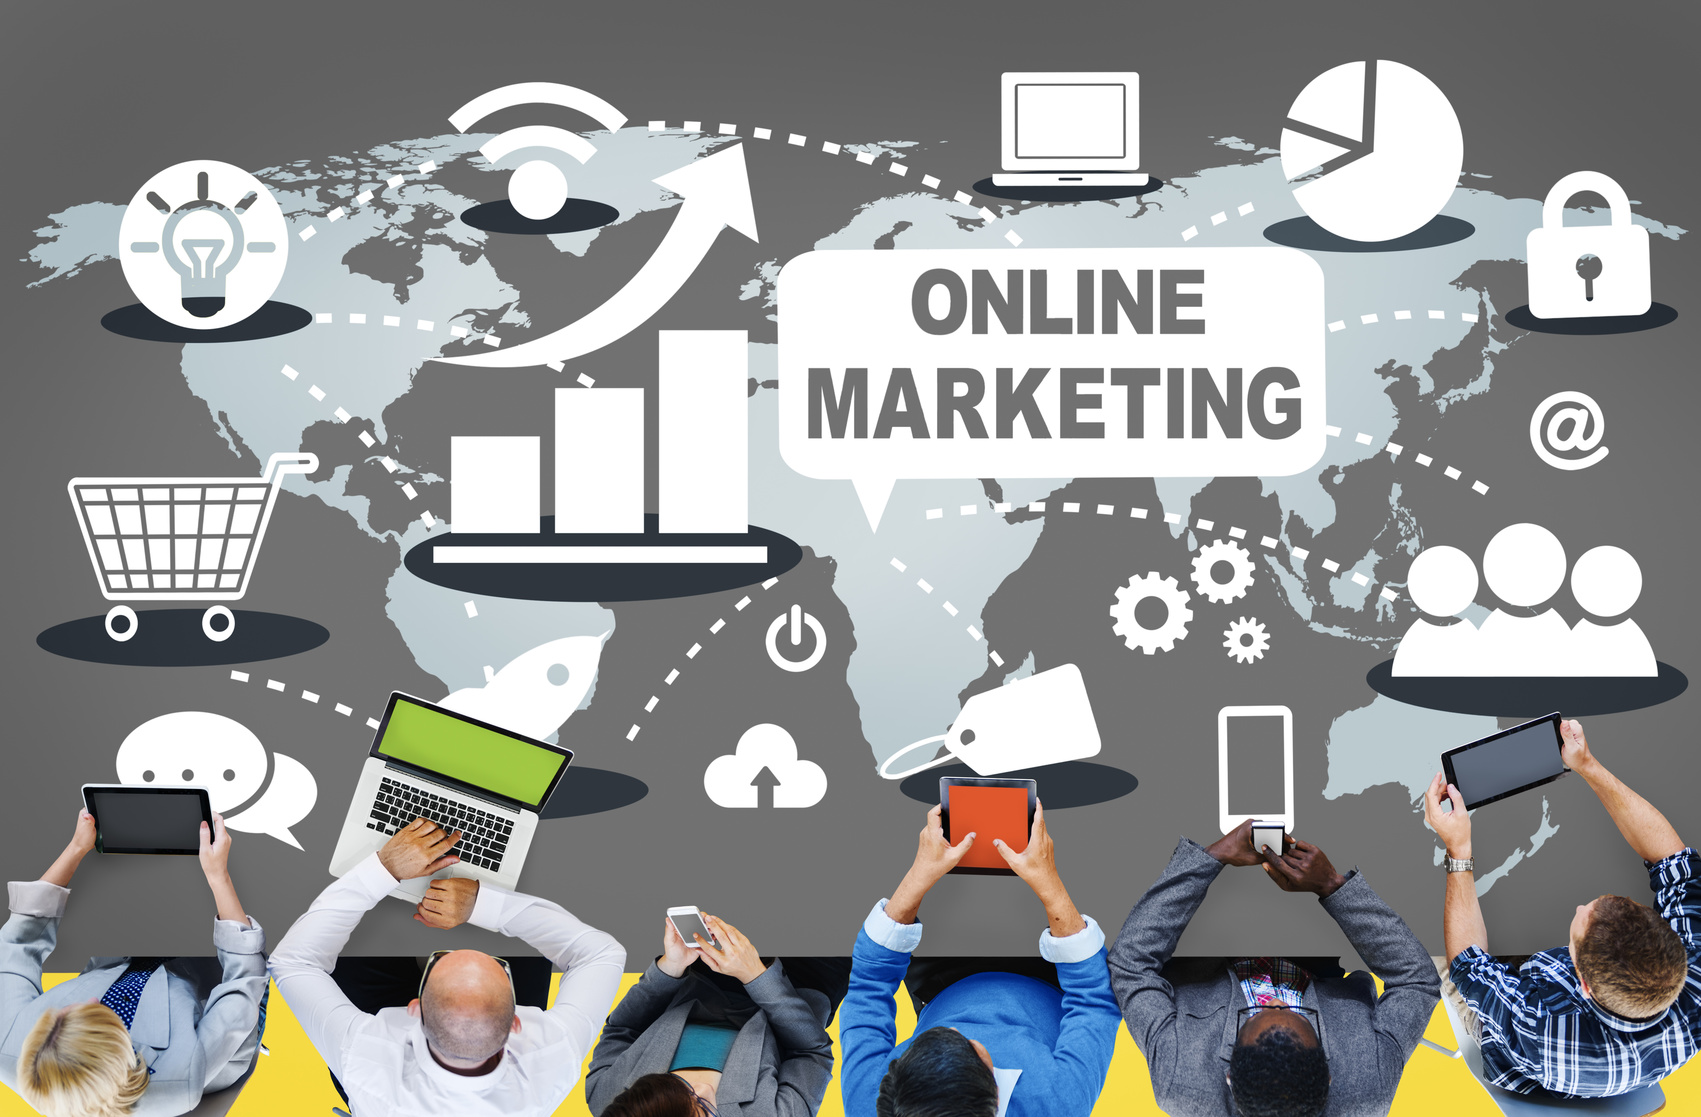 Are You Standing Out in the Online Marketplace?